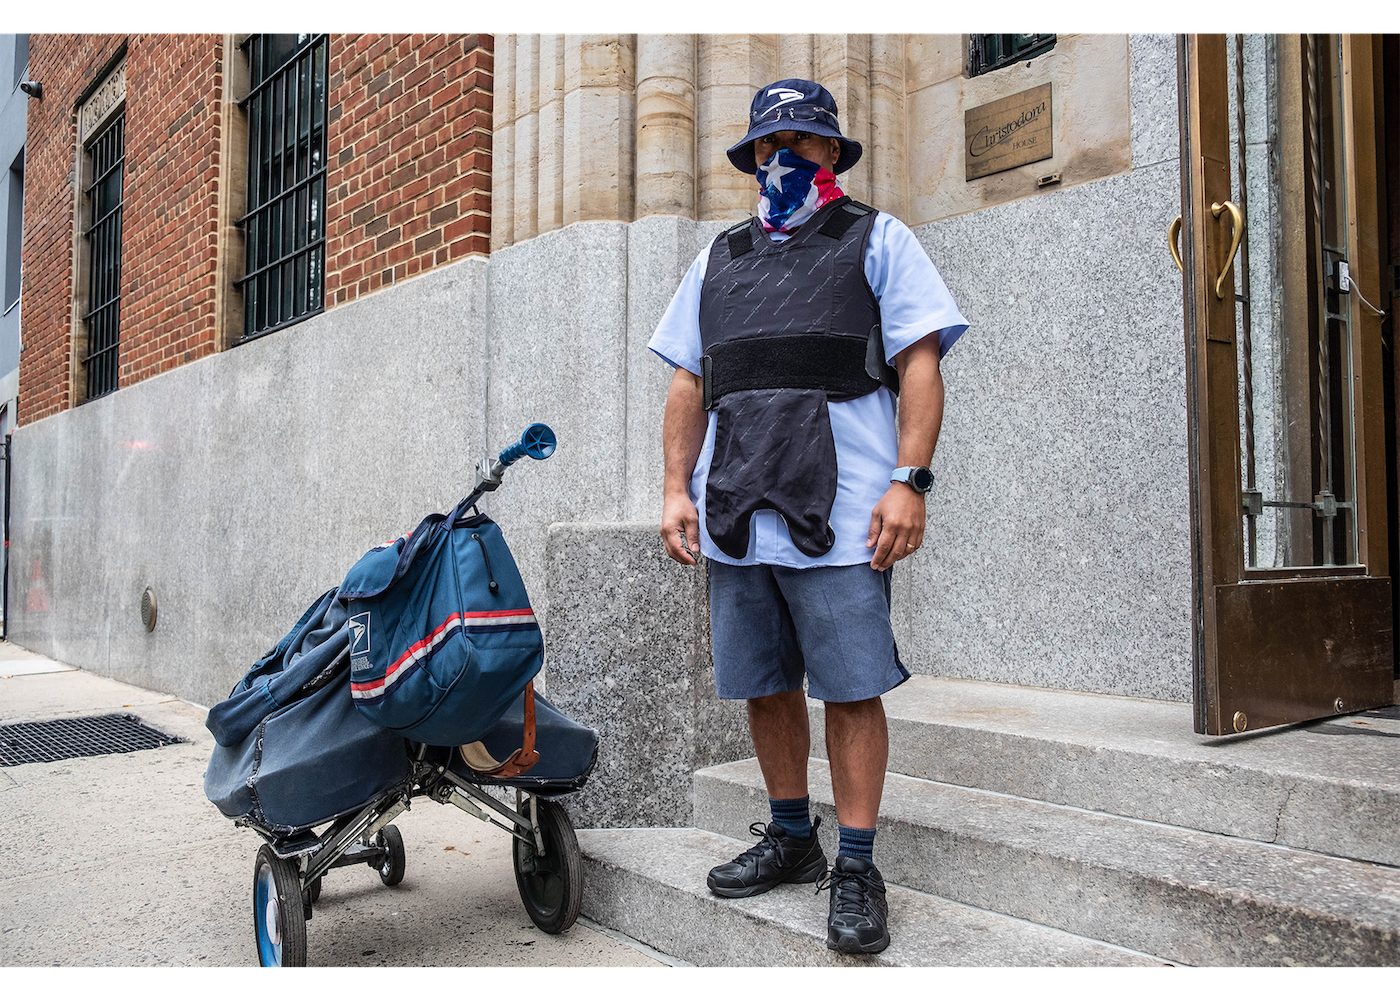 portrait of a mail person with bulletproof vest and mask